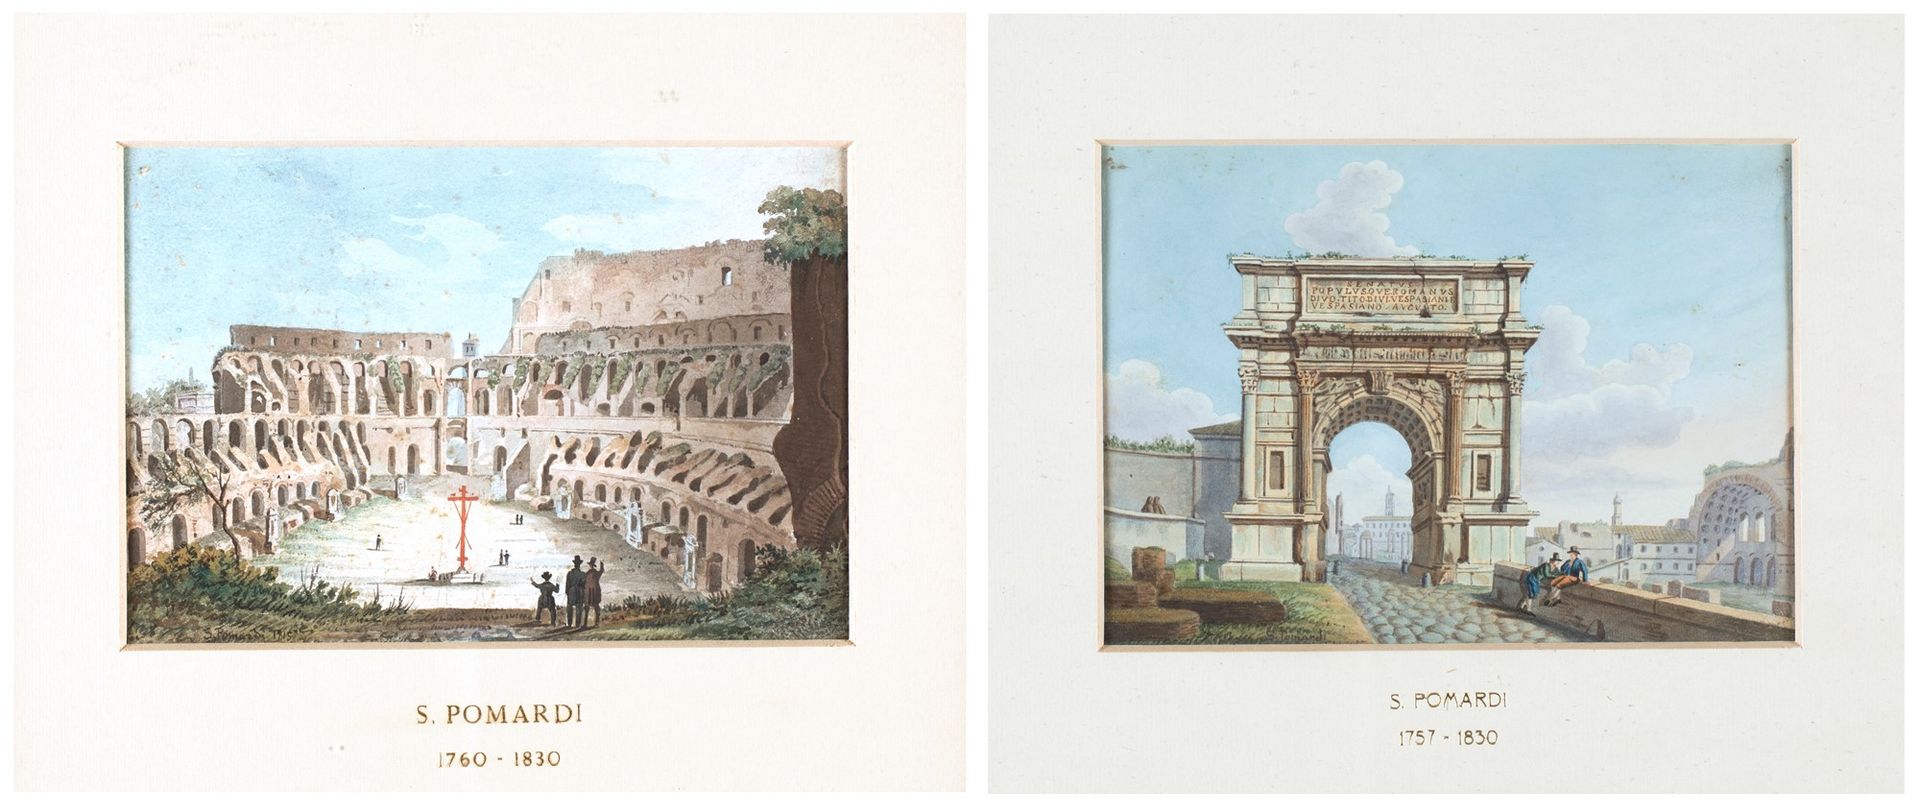 Simone Pomardi a) Internal view of the Flavian amphitheater b) The Arch of Titus&hellip;